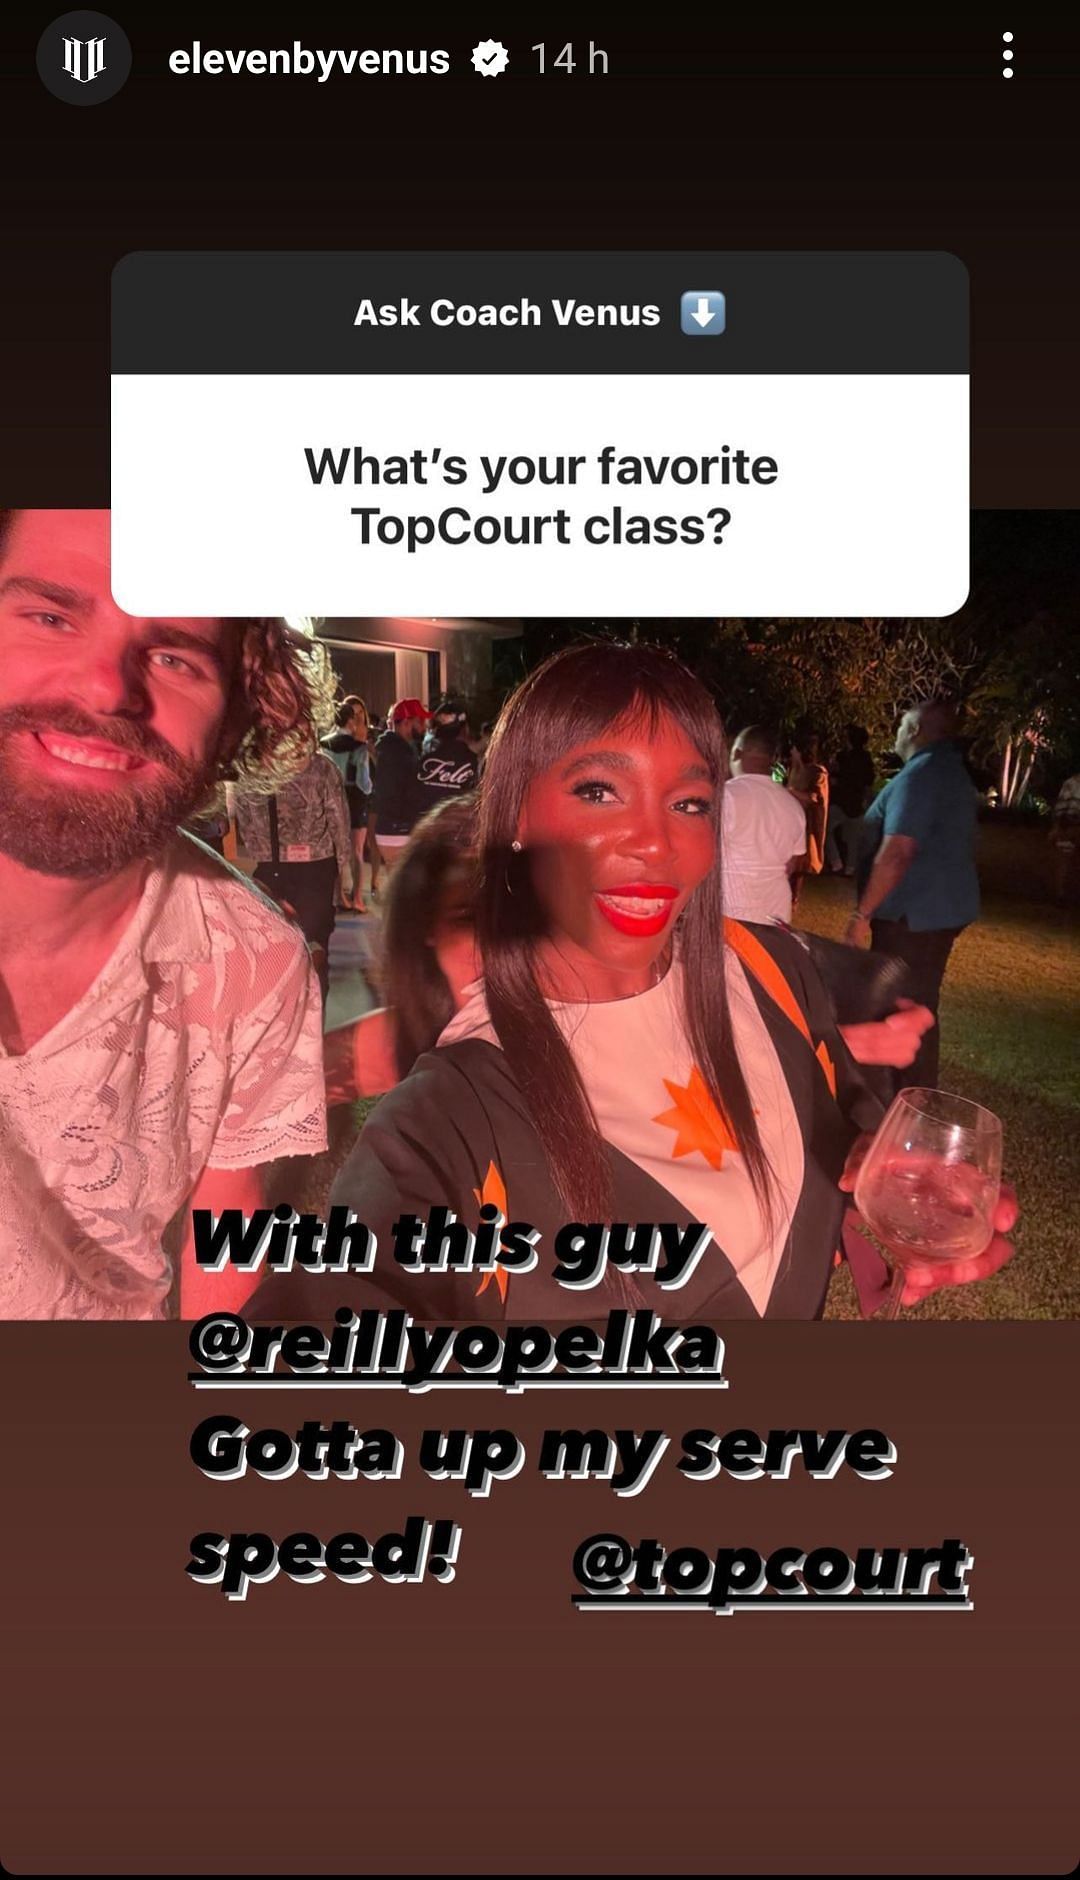 Venus Williams referred to Reilly Opelka&#039;s huge serve by sharing a picture in her Q&amp;A